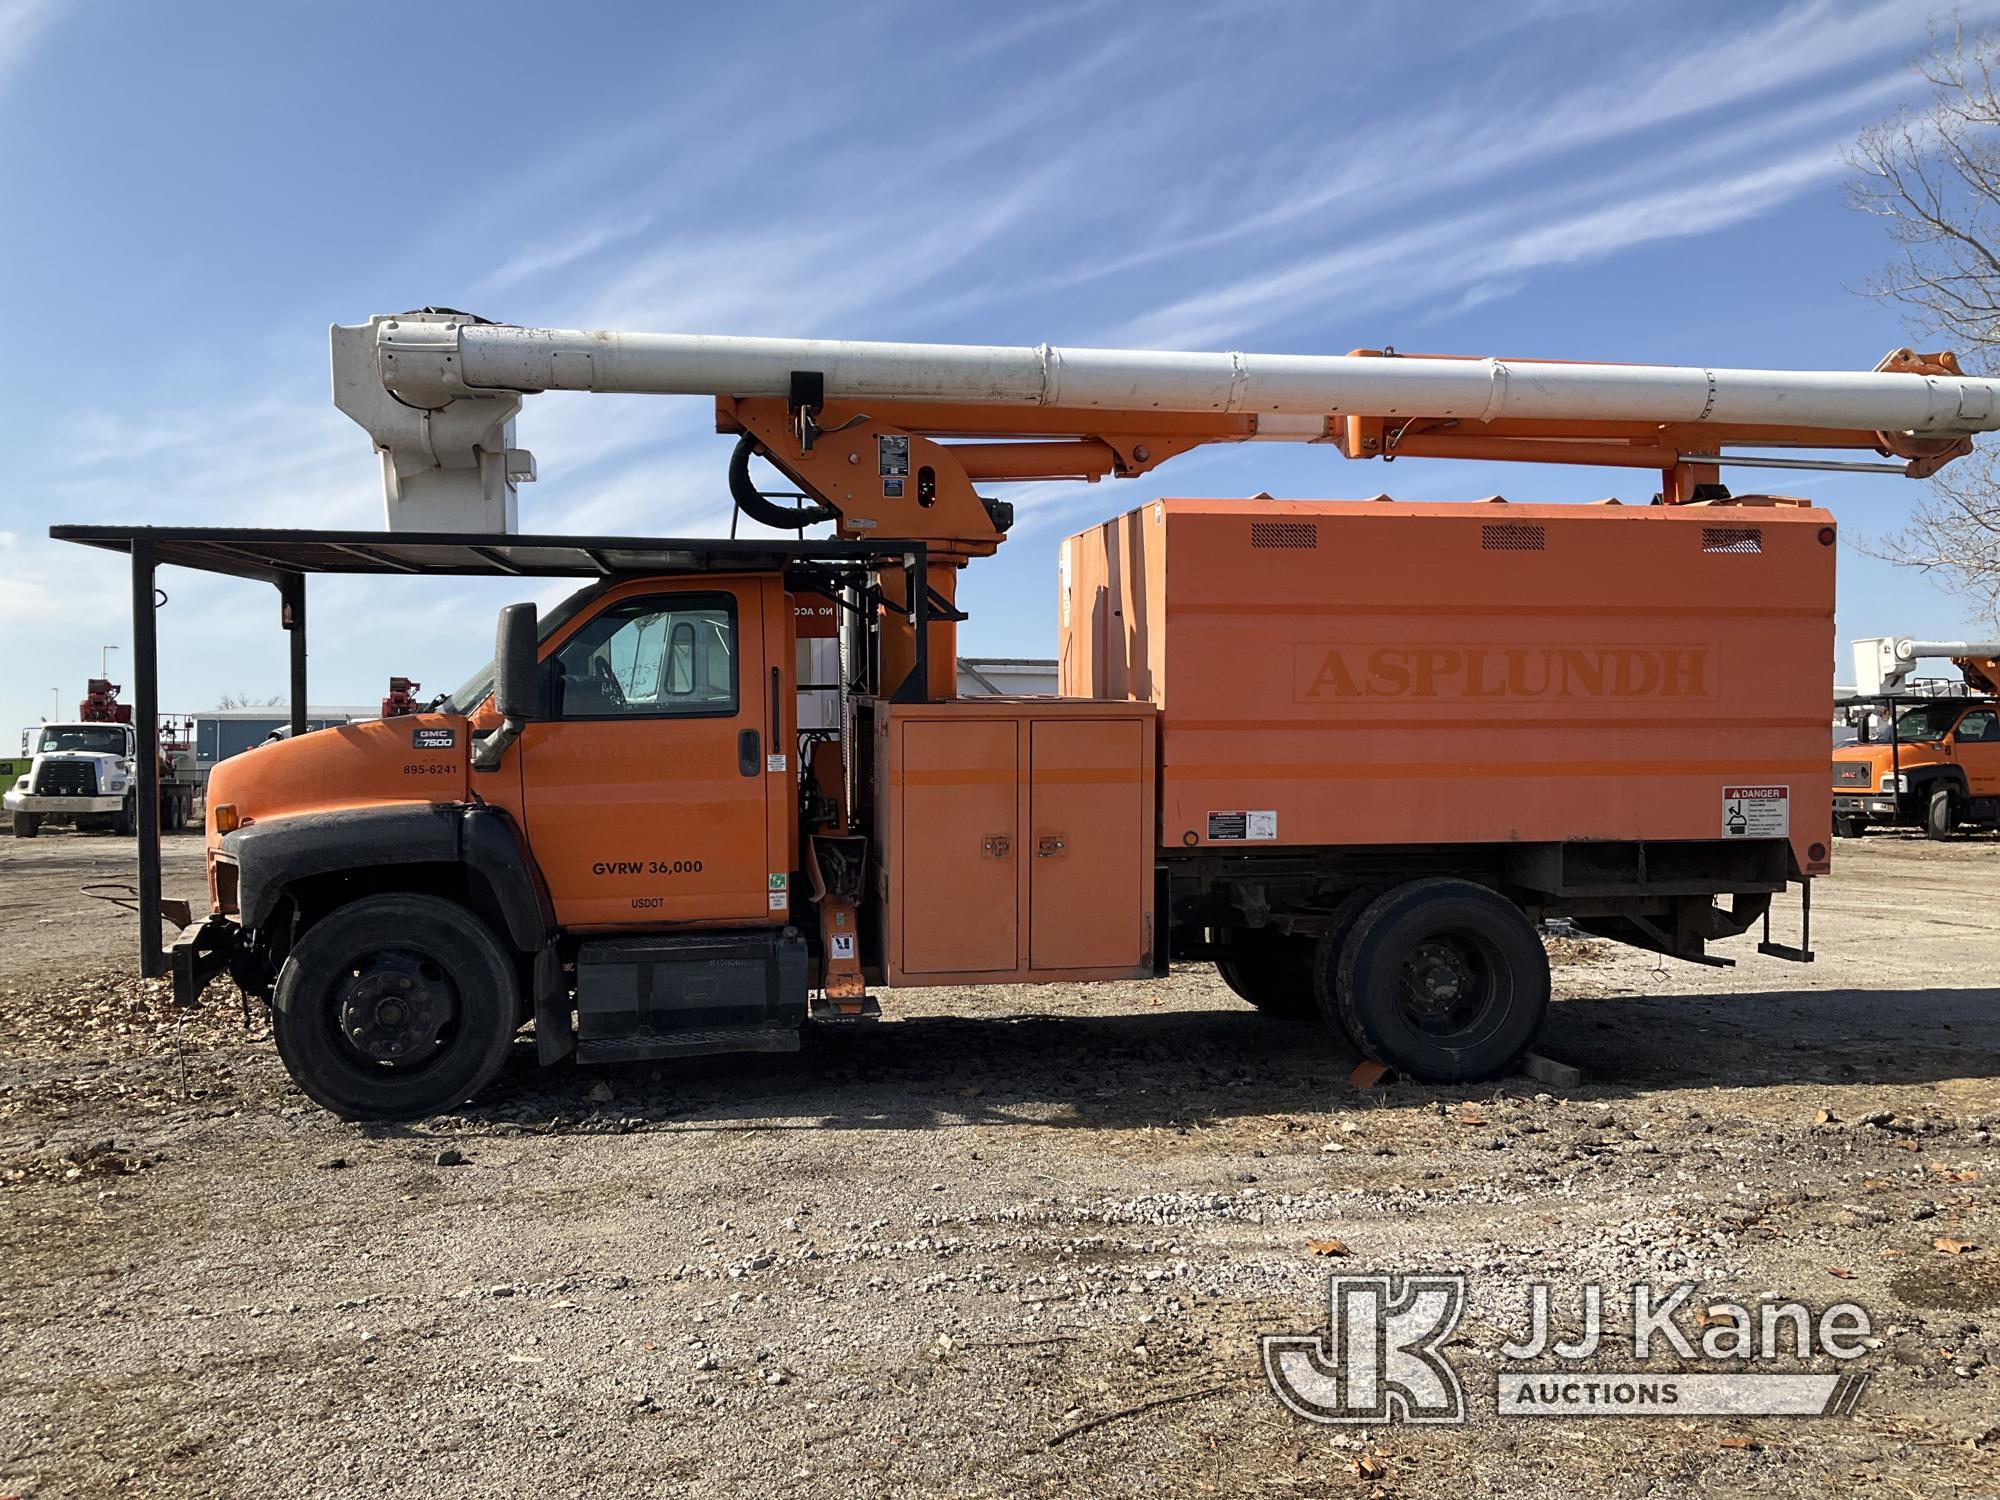 (Kansas City, MO) Altec LRV55, Over-Center Bucket Truck mounted behind cab on 2006 GMC C7500 Chipper